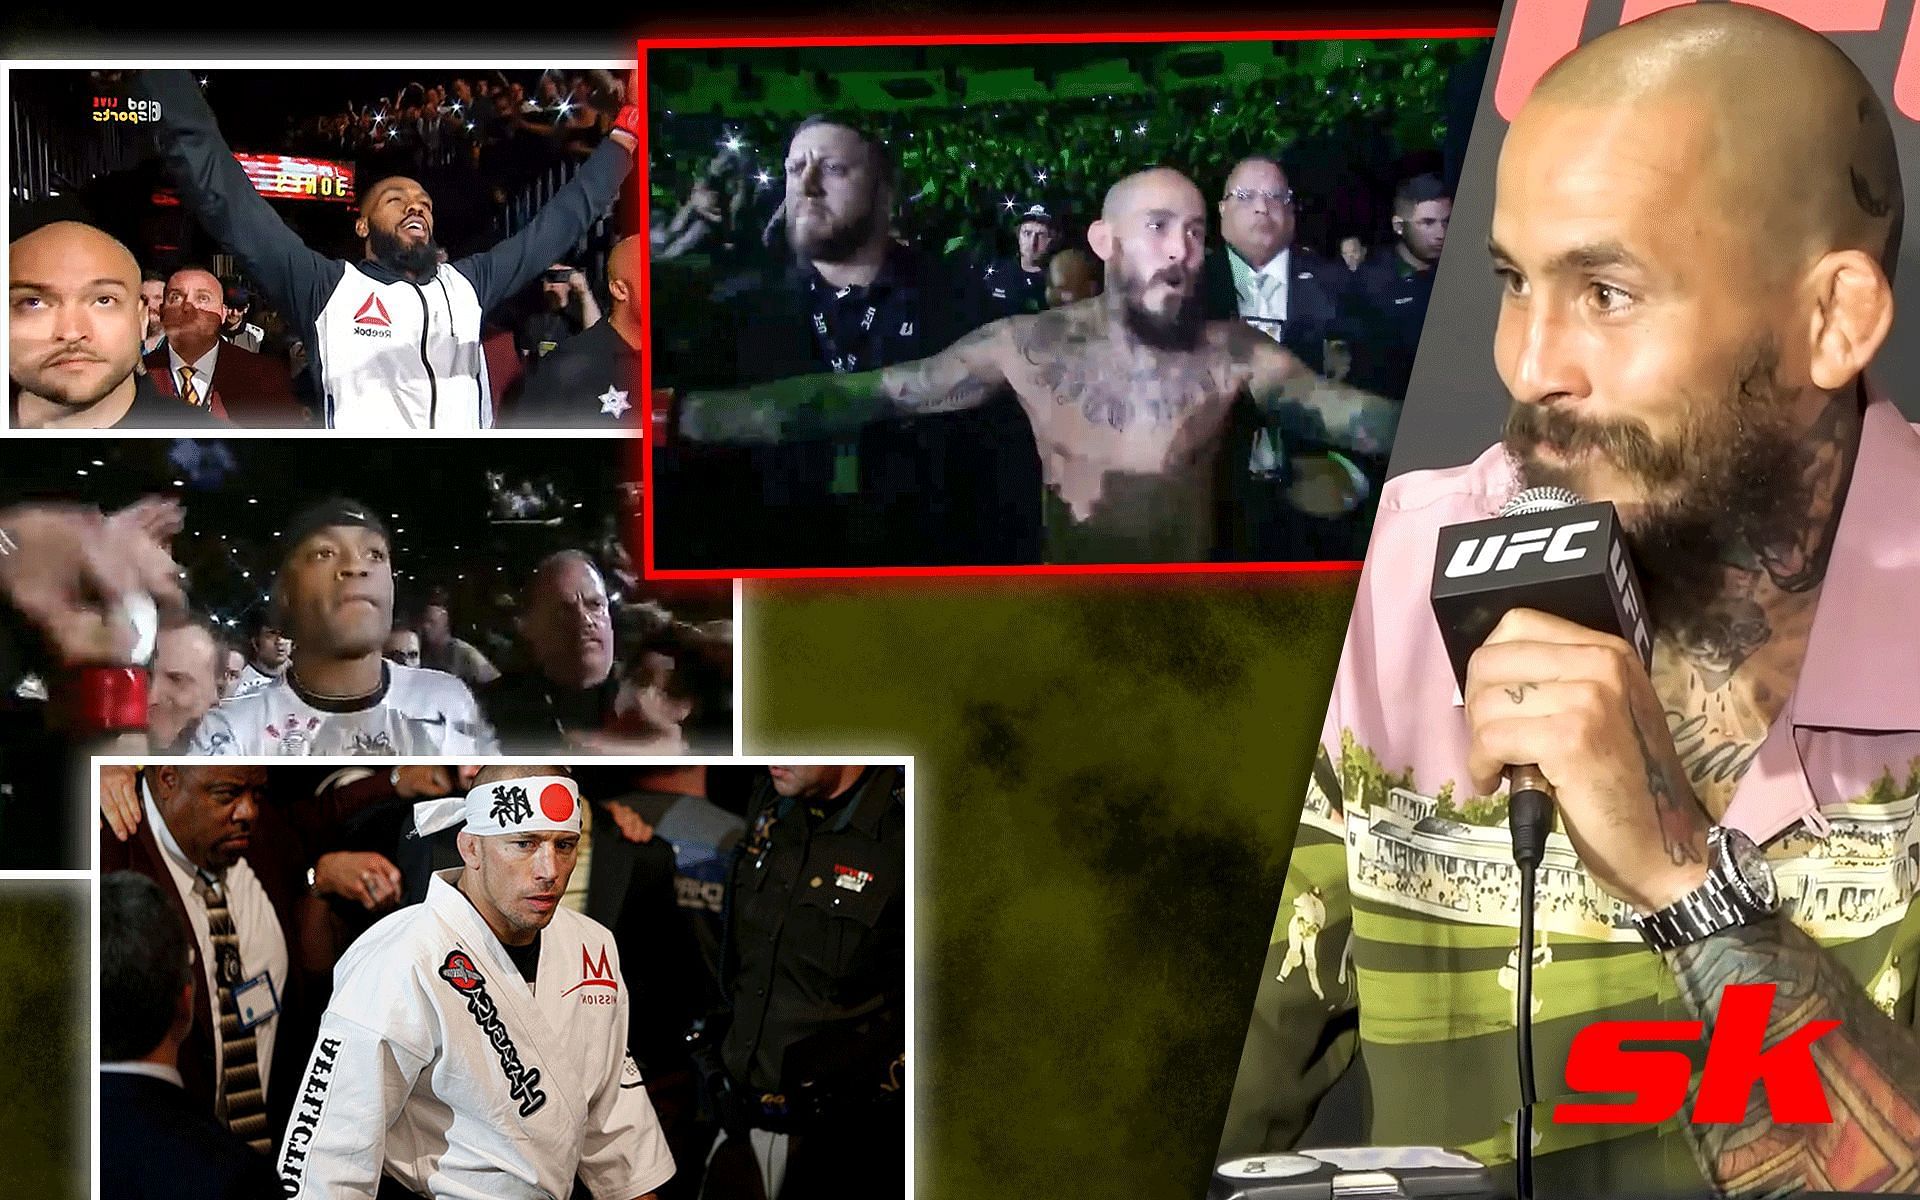 Jon Jones (top left), Anderson Silva (center left), Georges St-Pierre (bottom left), and Marlon Vera (center and right). [Images: Vera images from YouTube MMAFighting and Instagram @chitoveraufc, GSP image from ufc.com, Silva image from YouTube mattyboyluvsthepoon, Jones image from YouTube wonderfulBrown]